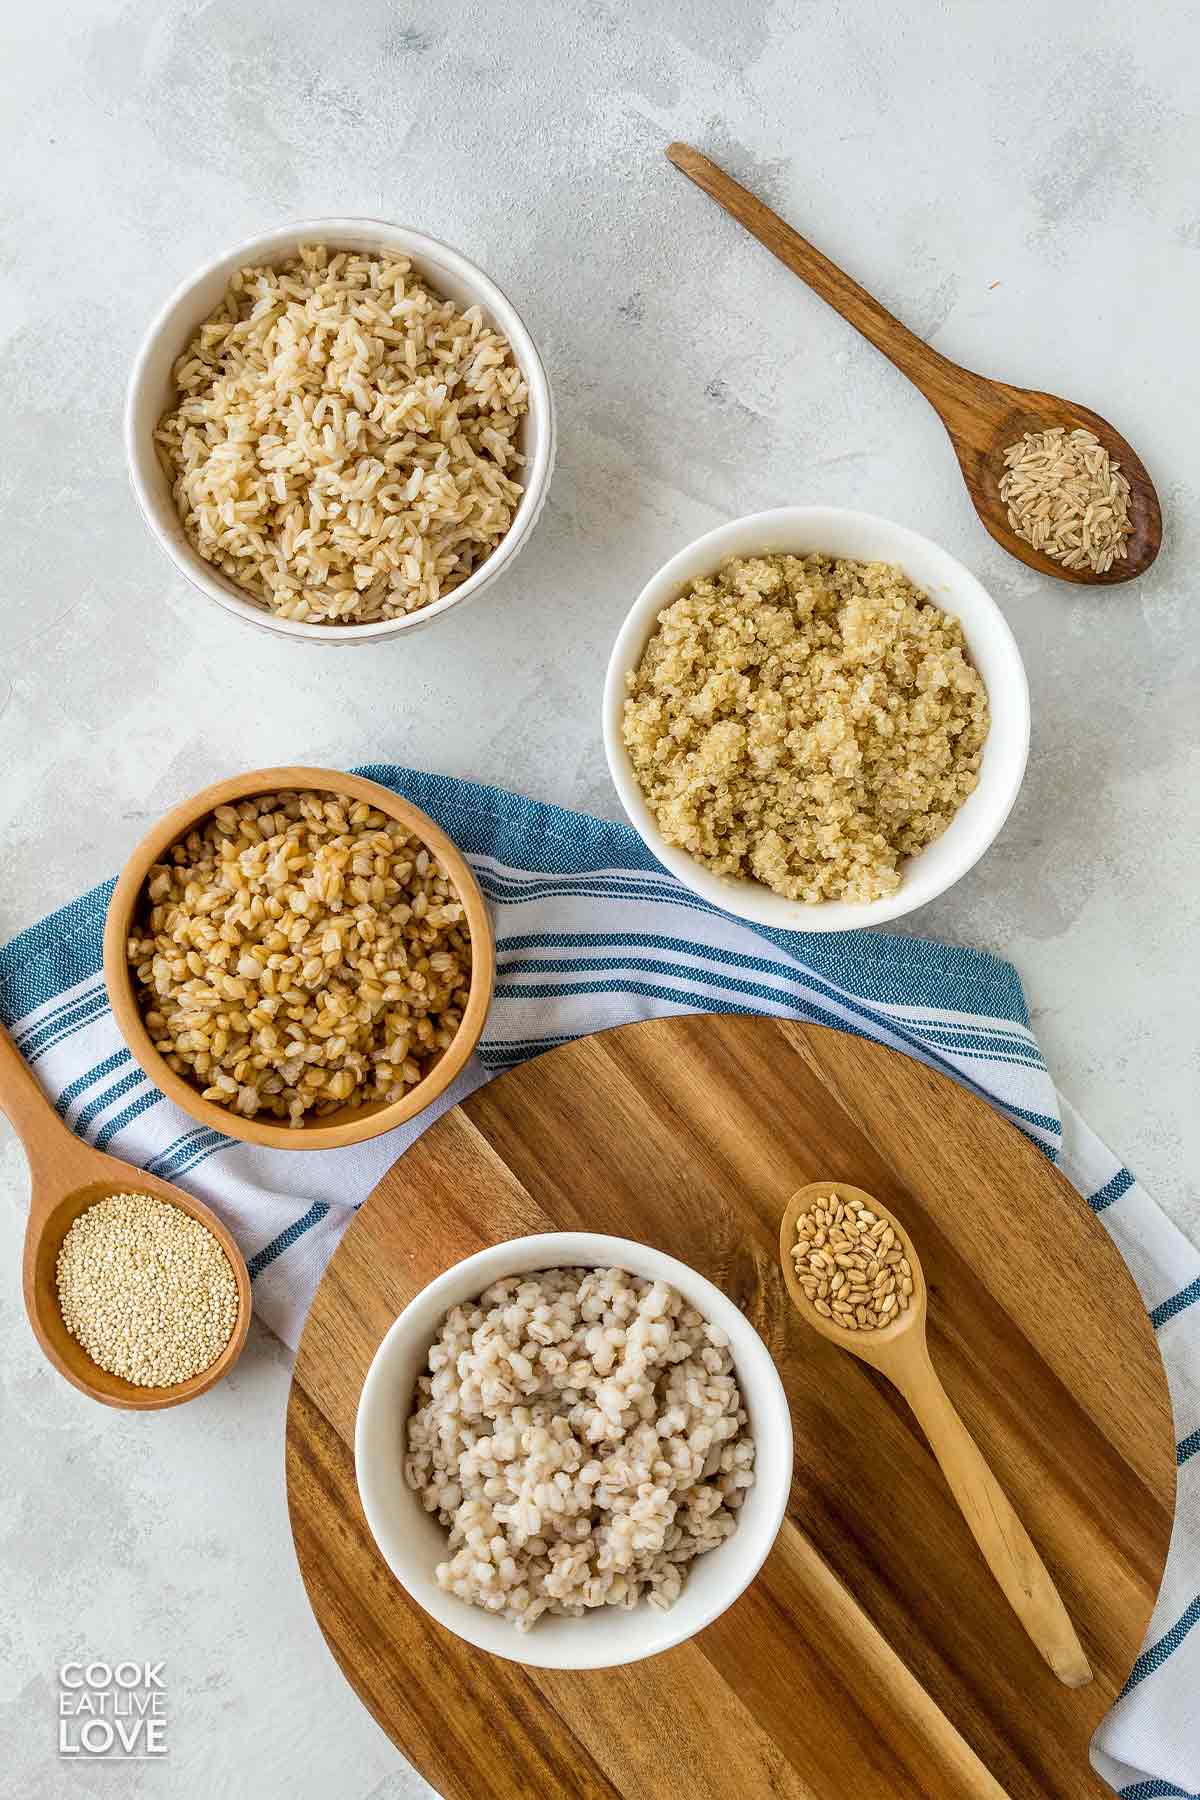 Bowls of cooked grains on the table.